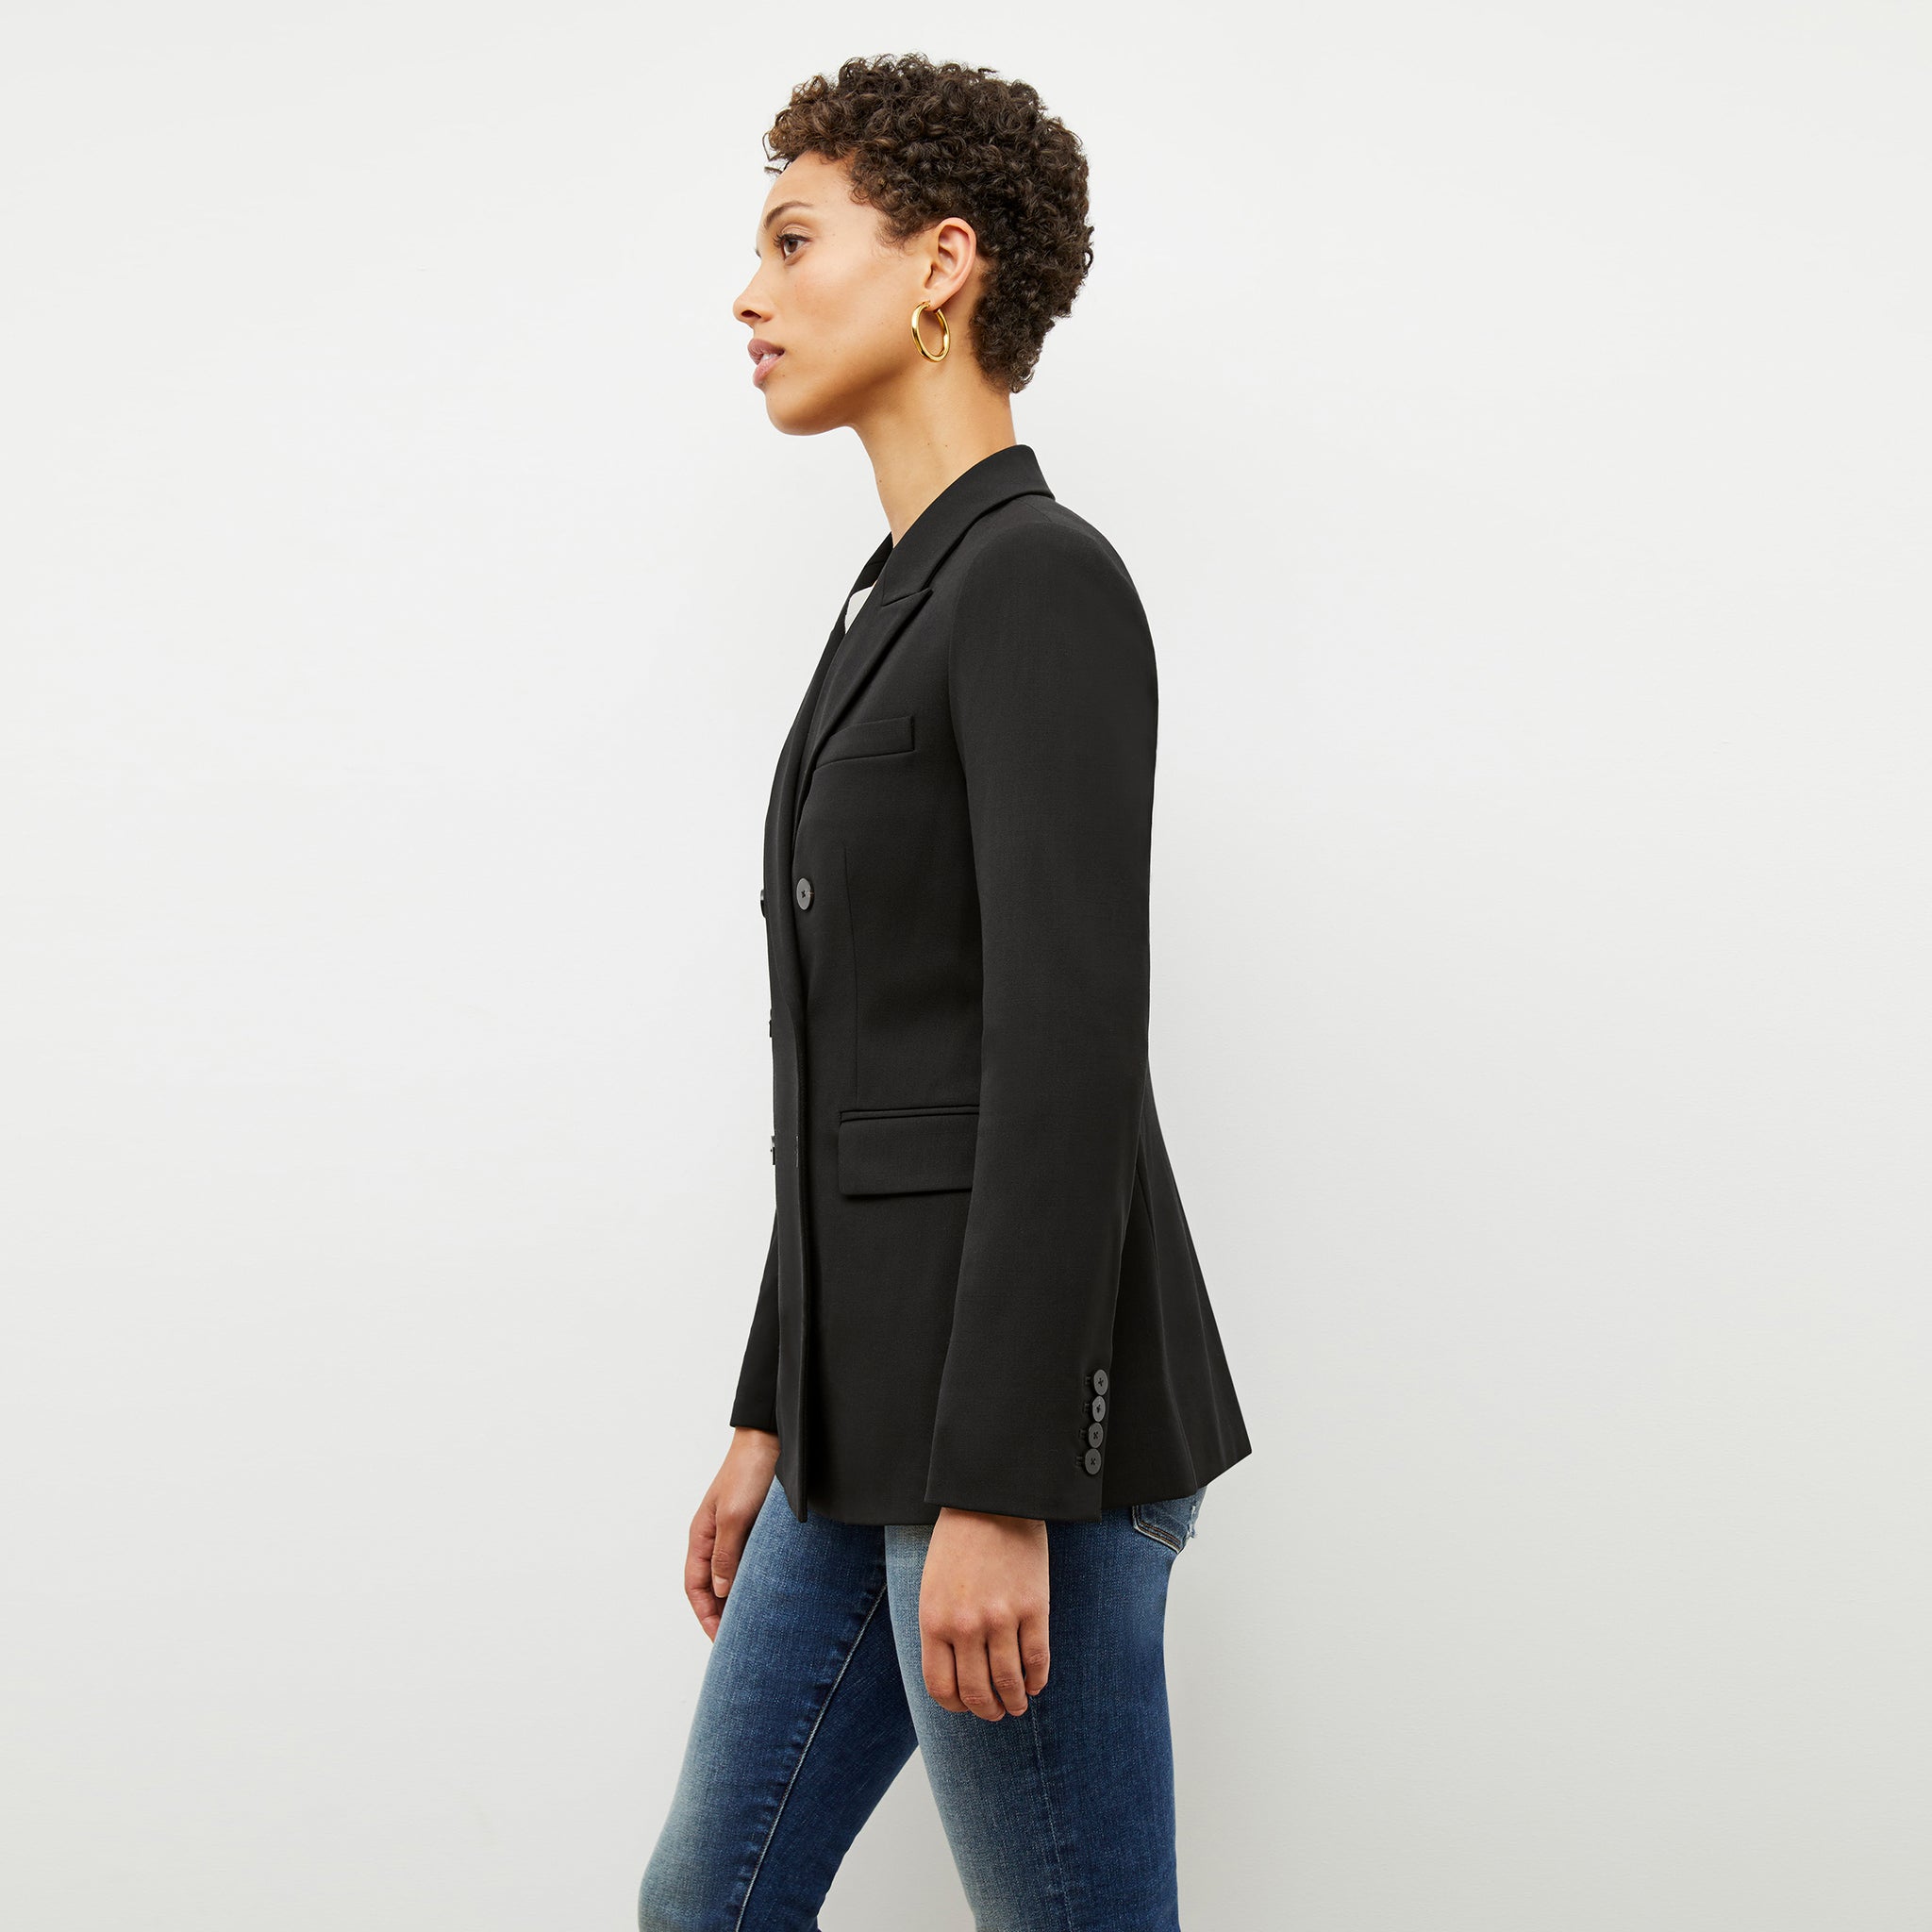 Side image of a woman wearing the kati jacket in black